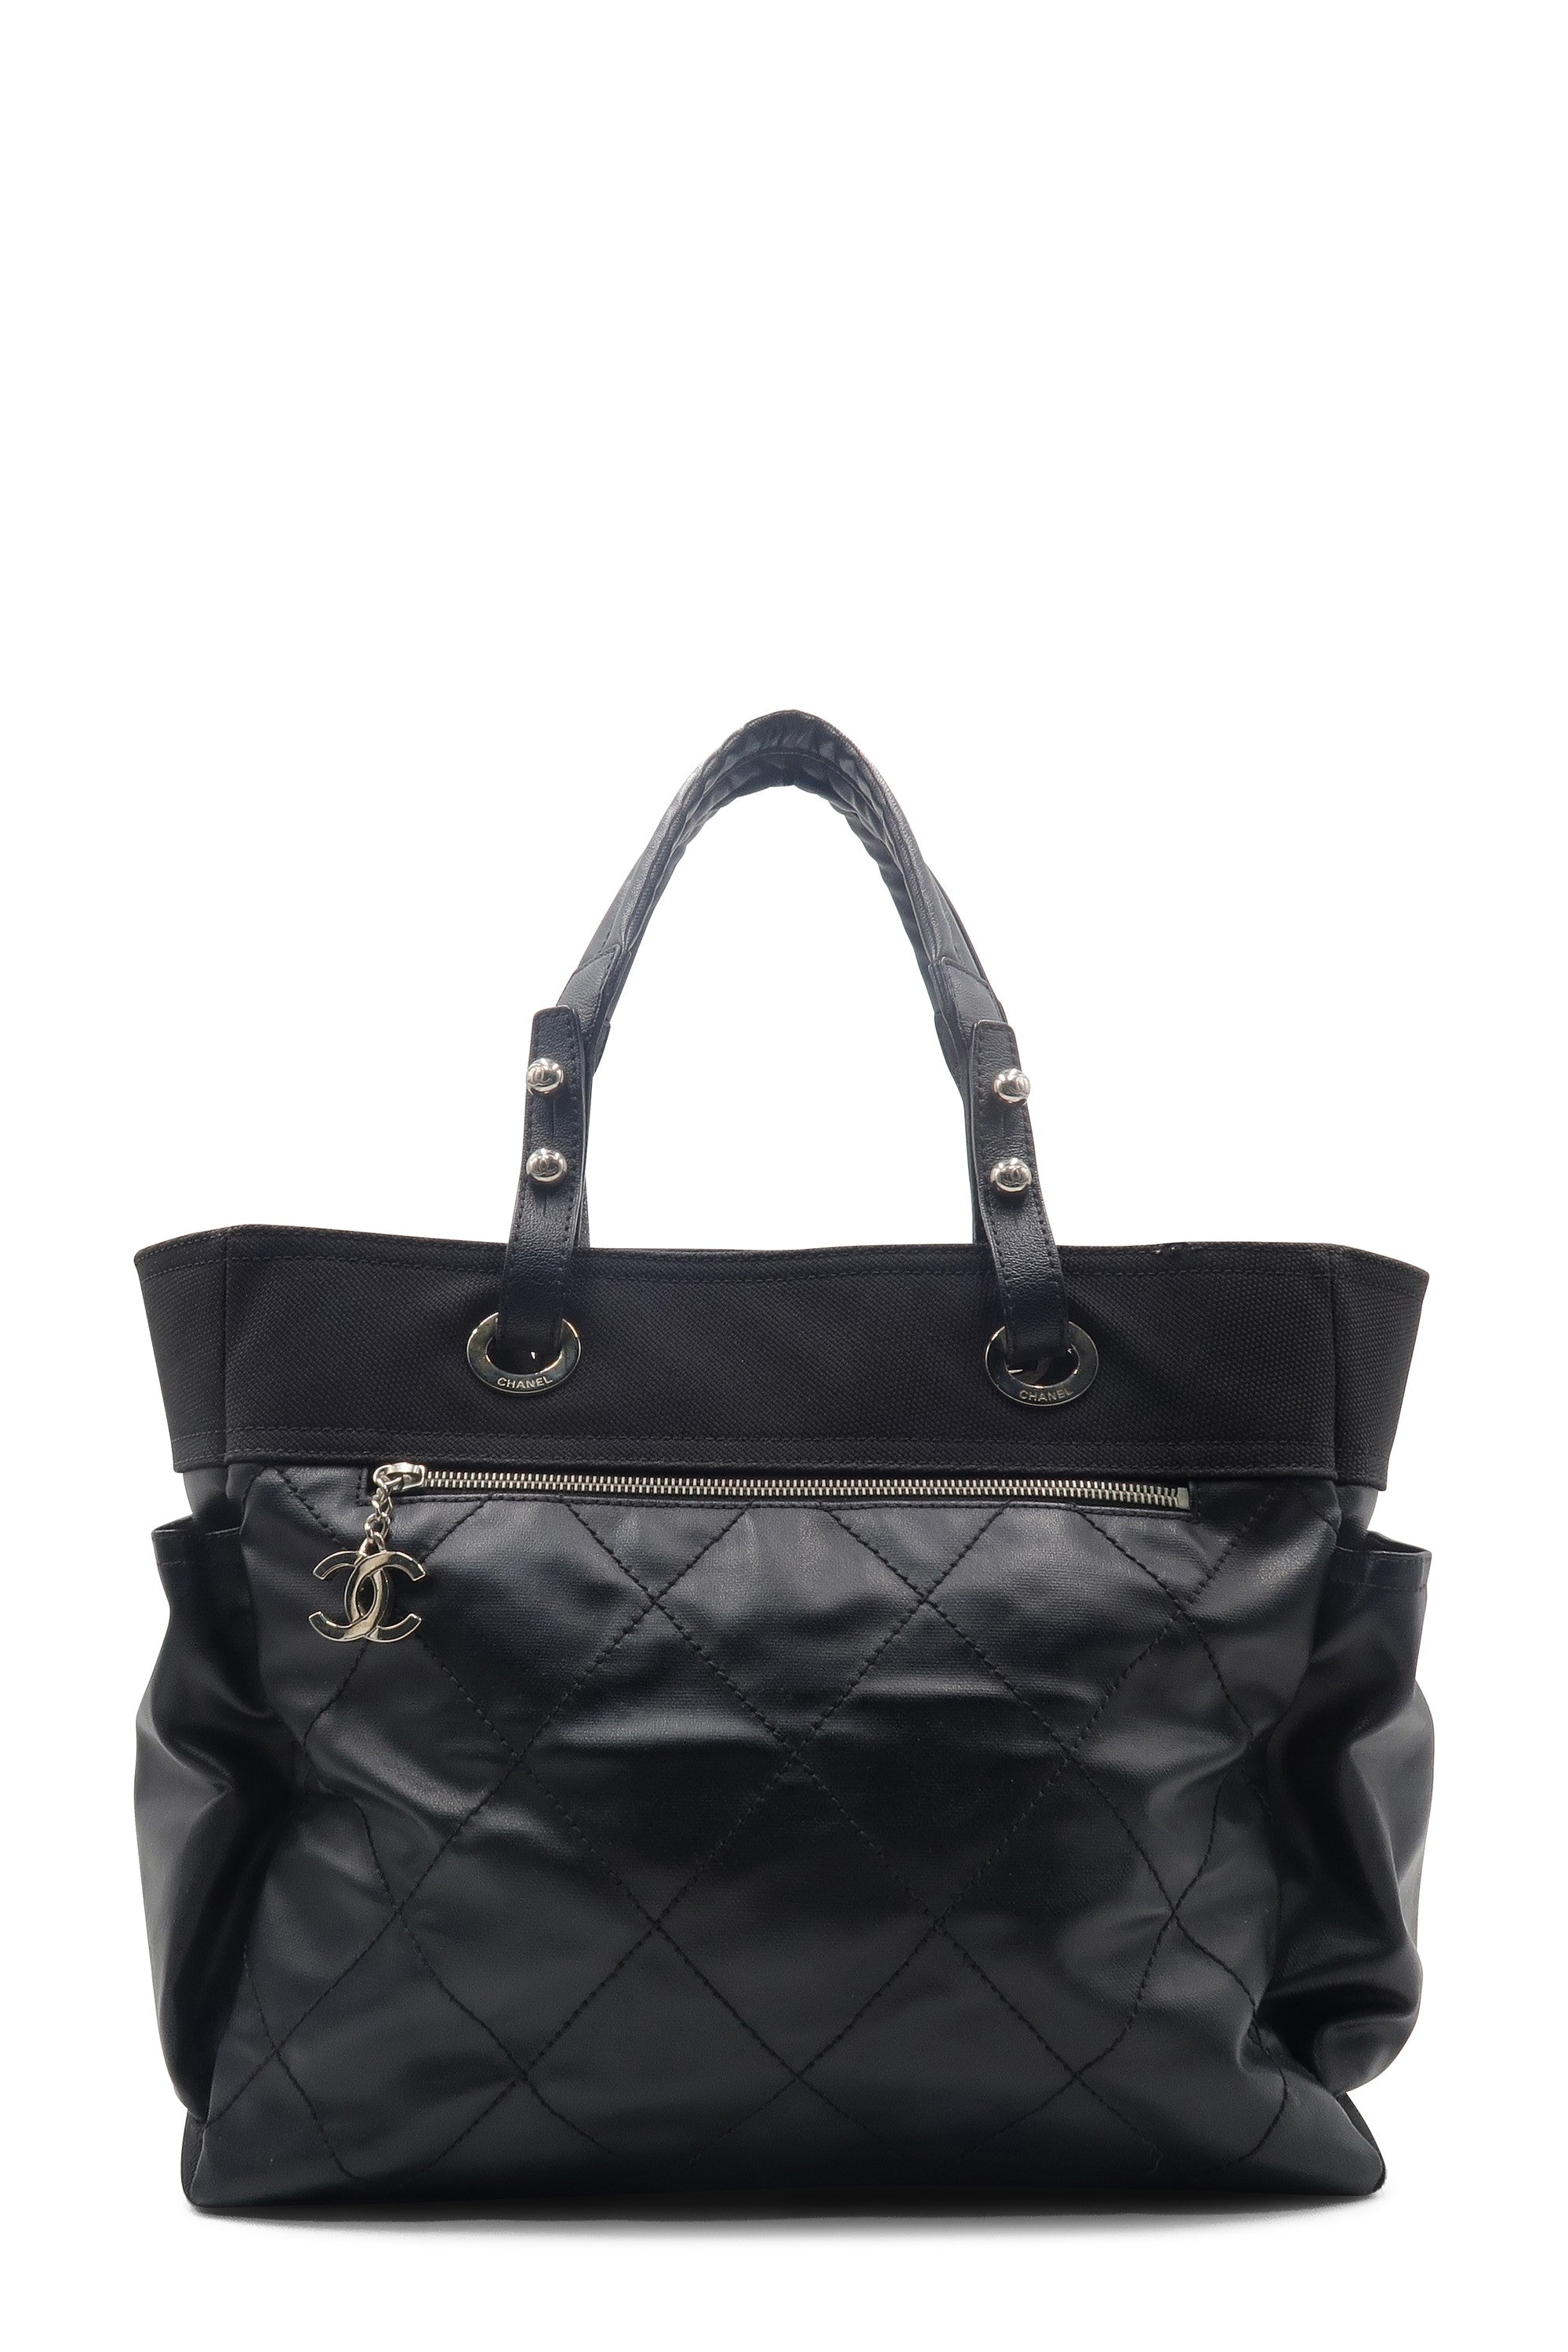 chanel black tote canvas leather